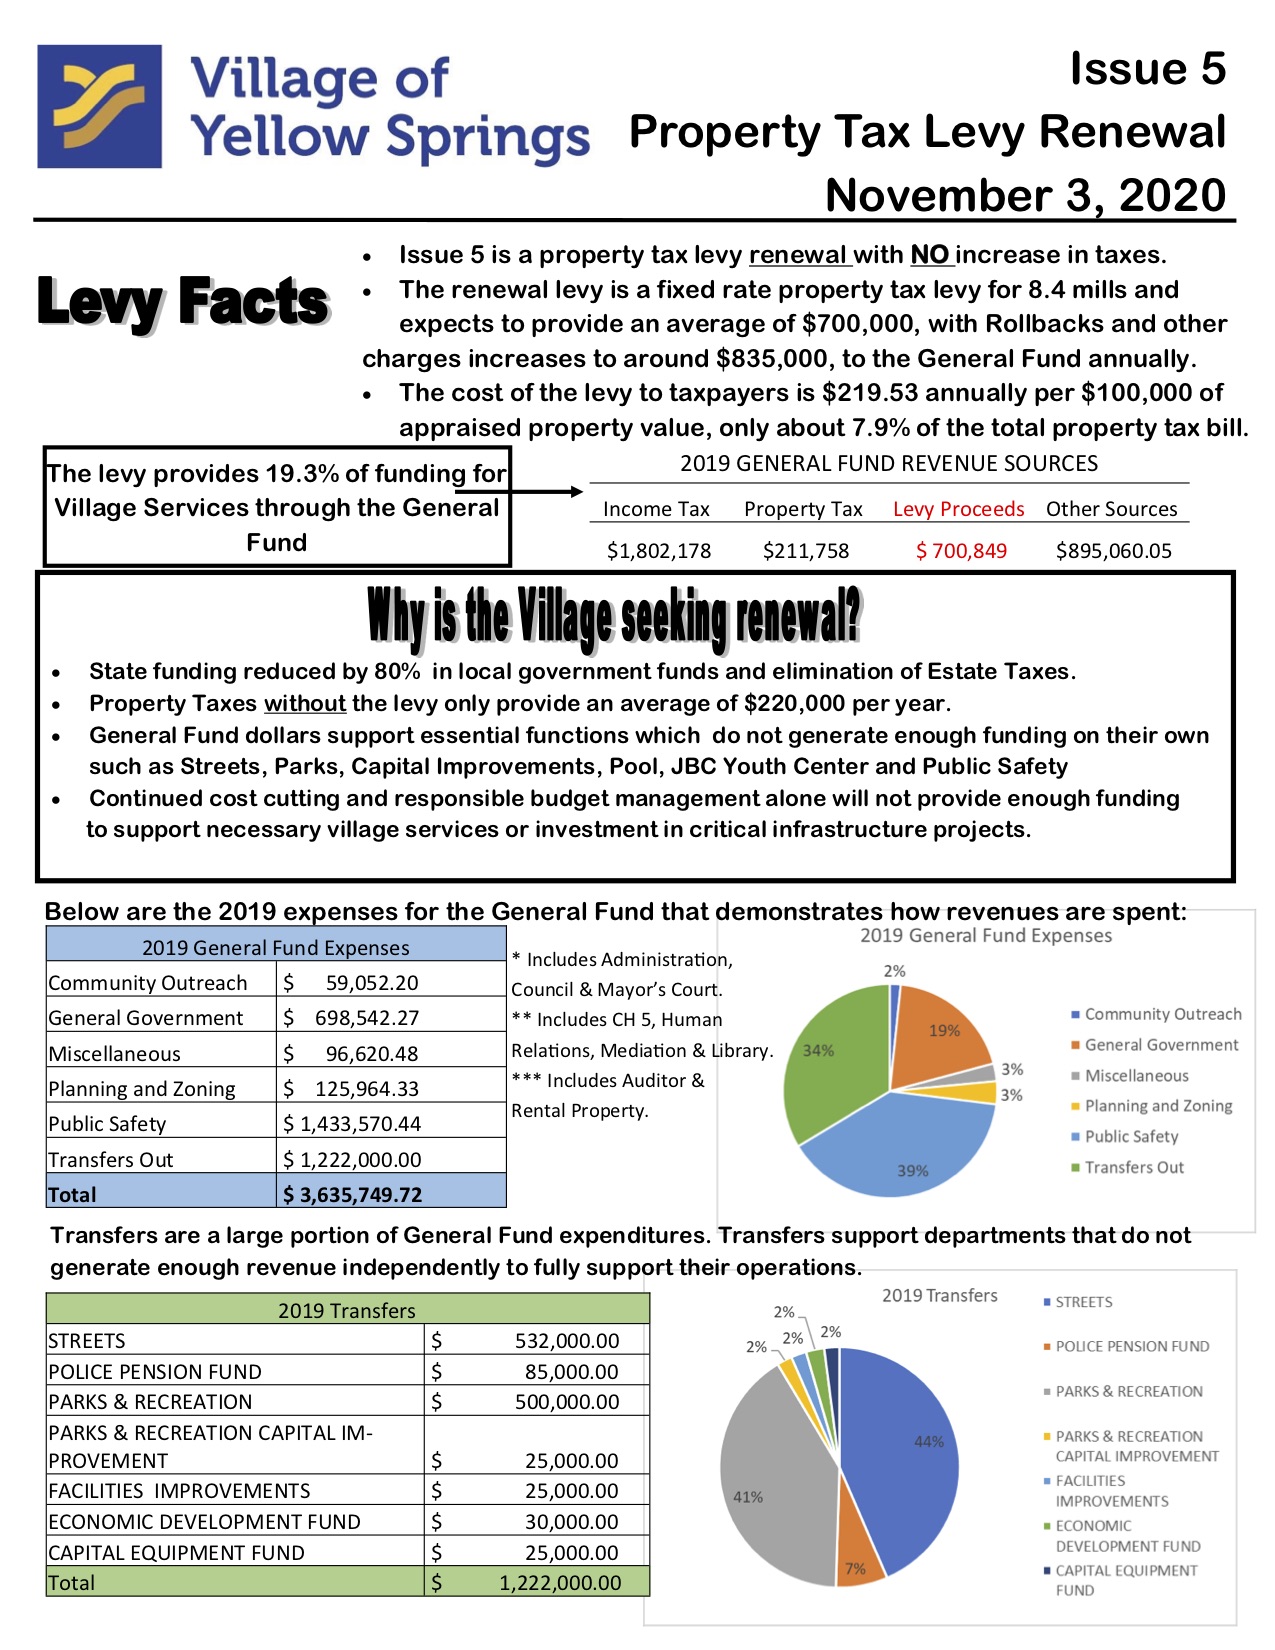 VYS Tax Levy Information